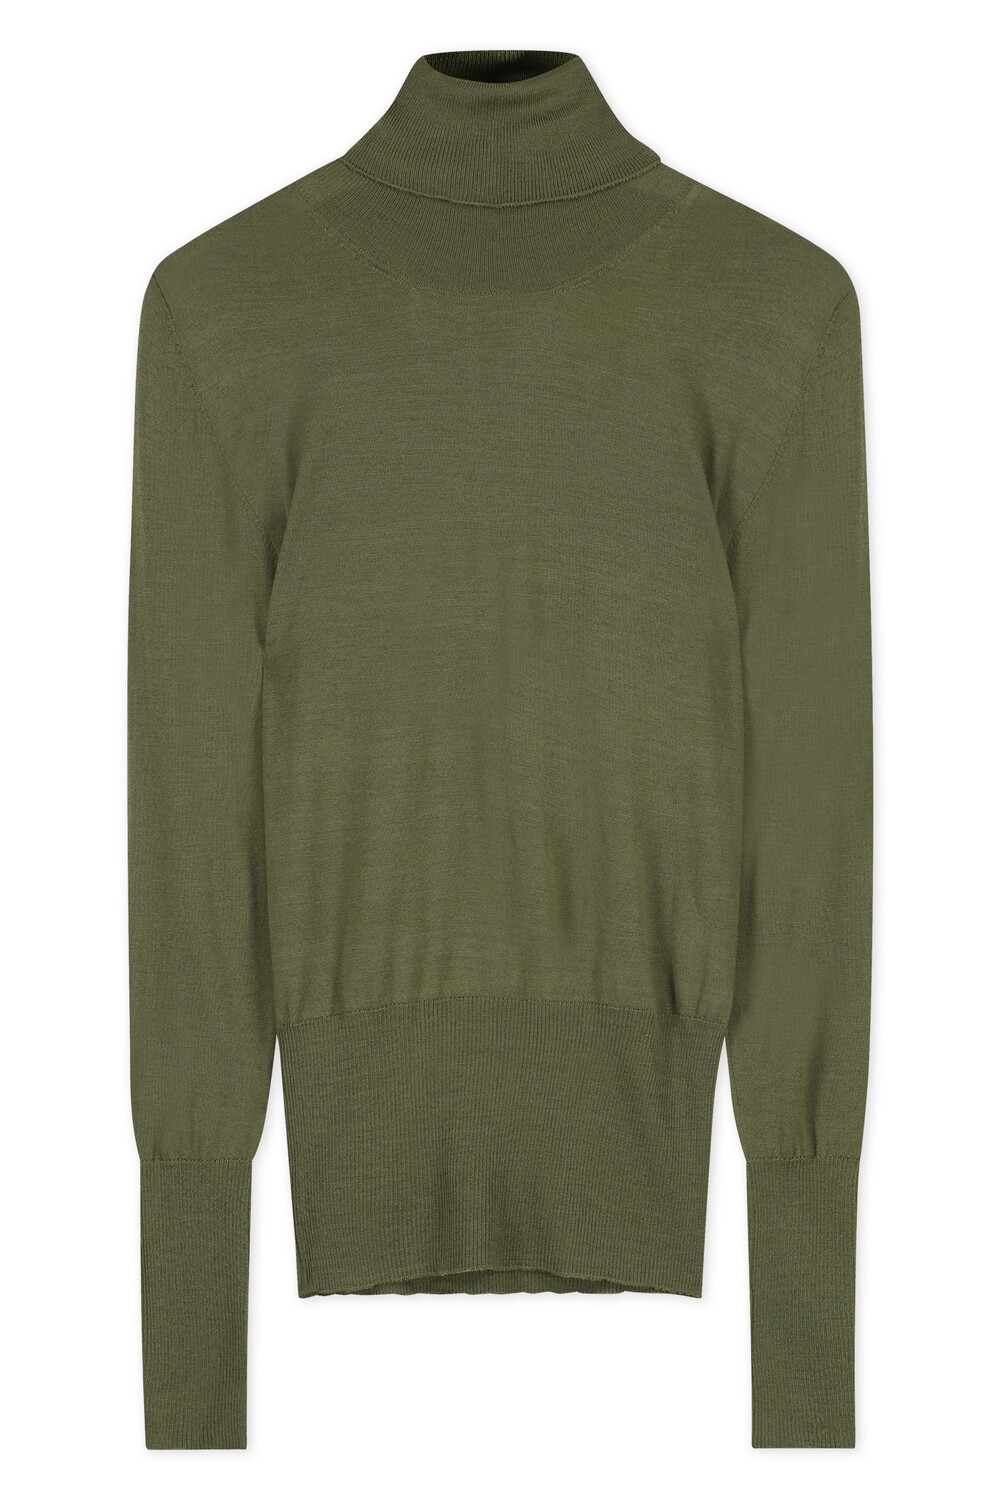 FITTED SWEATER TURTLENECK IN MILITARE